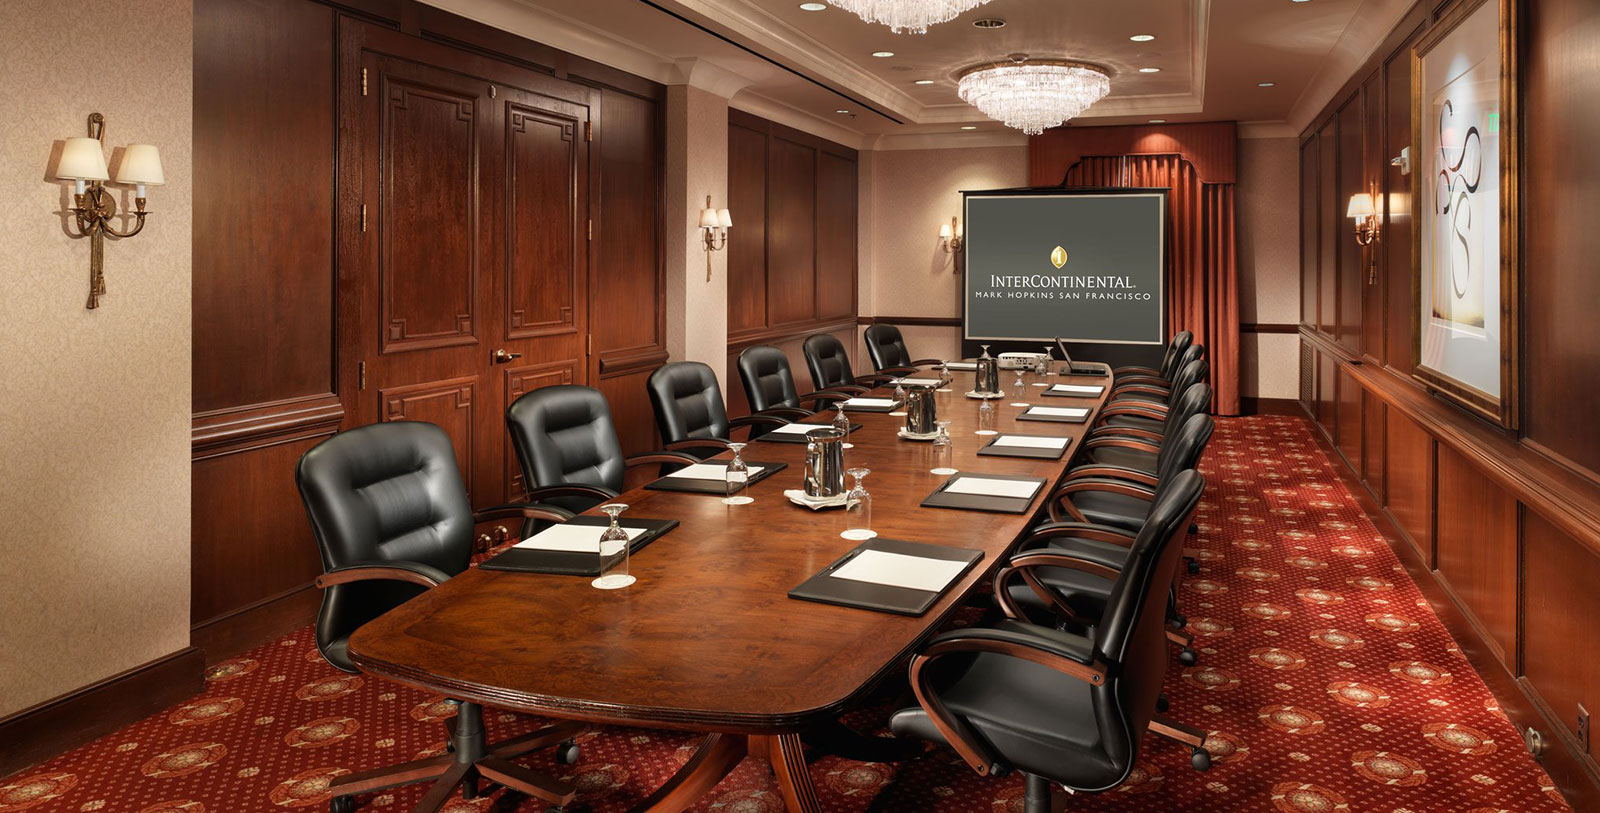 Image of Boardroom, InterContinental Mark Hopkins Hotel in San Francisco, California, 1926, Member of Historic Hotels of America, Request for Proposal